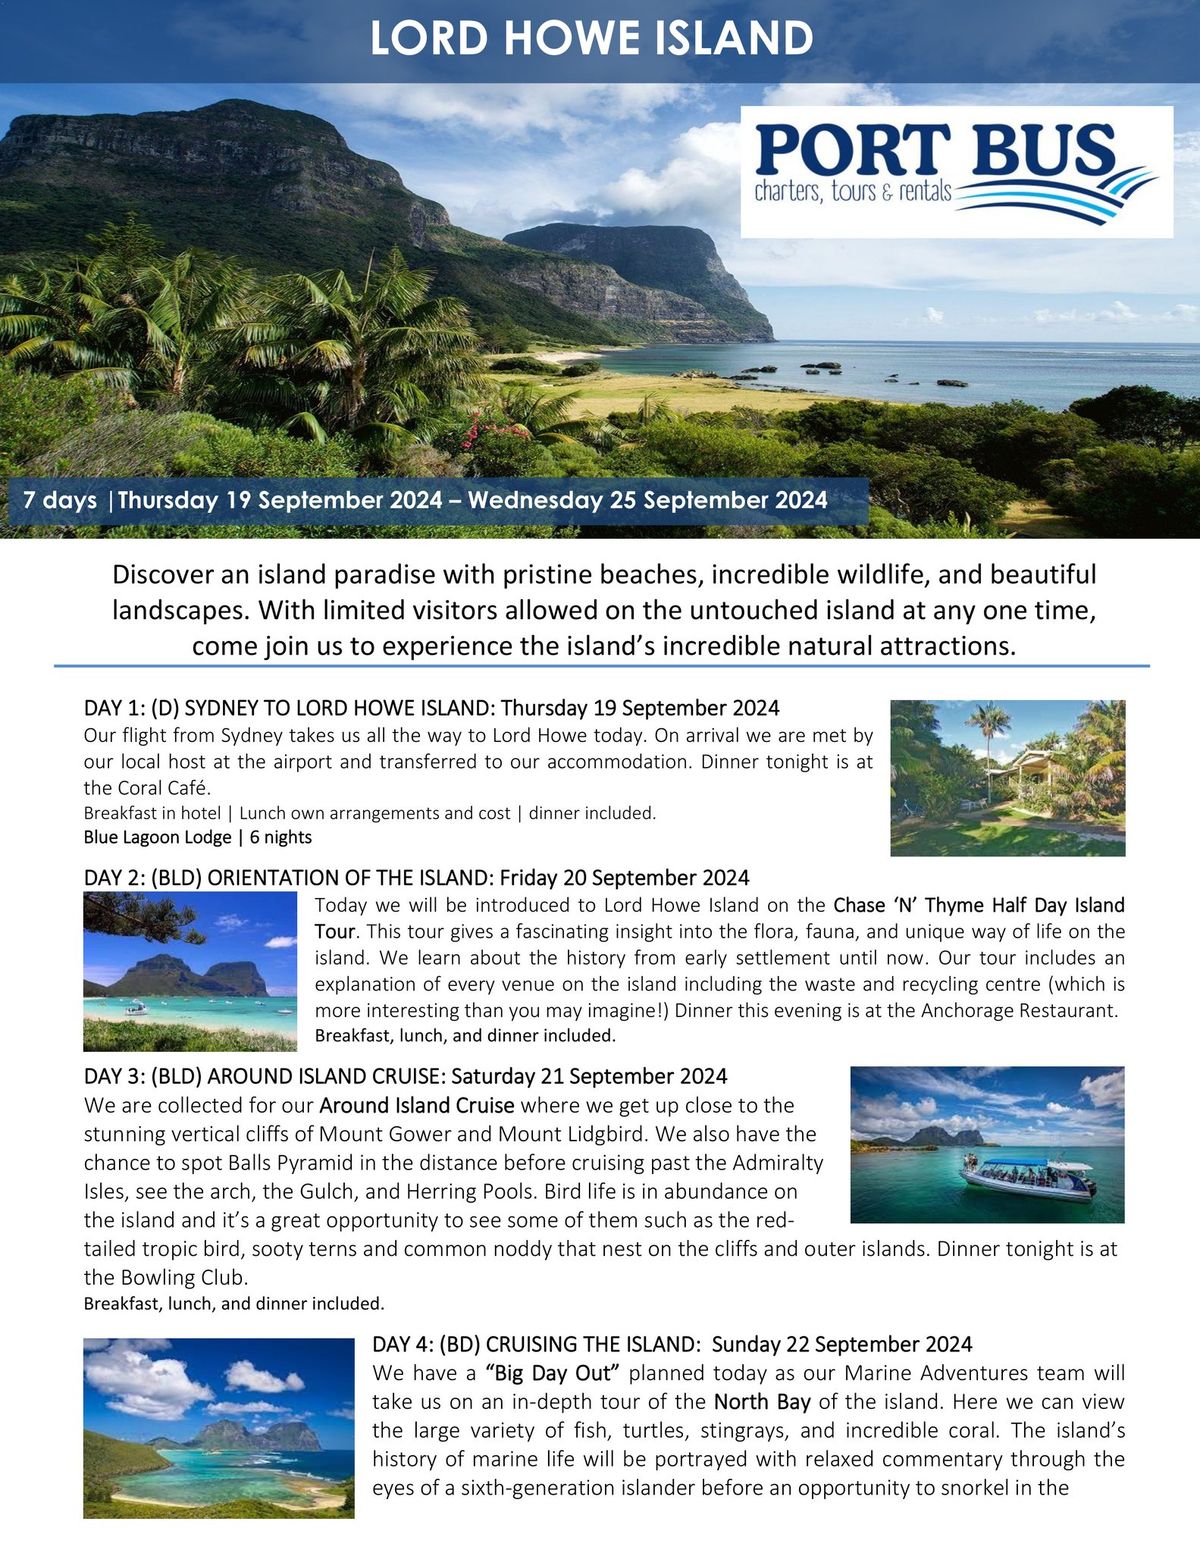 Lord Howe Island with Port Bus